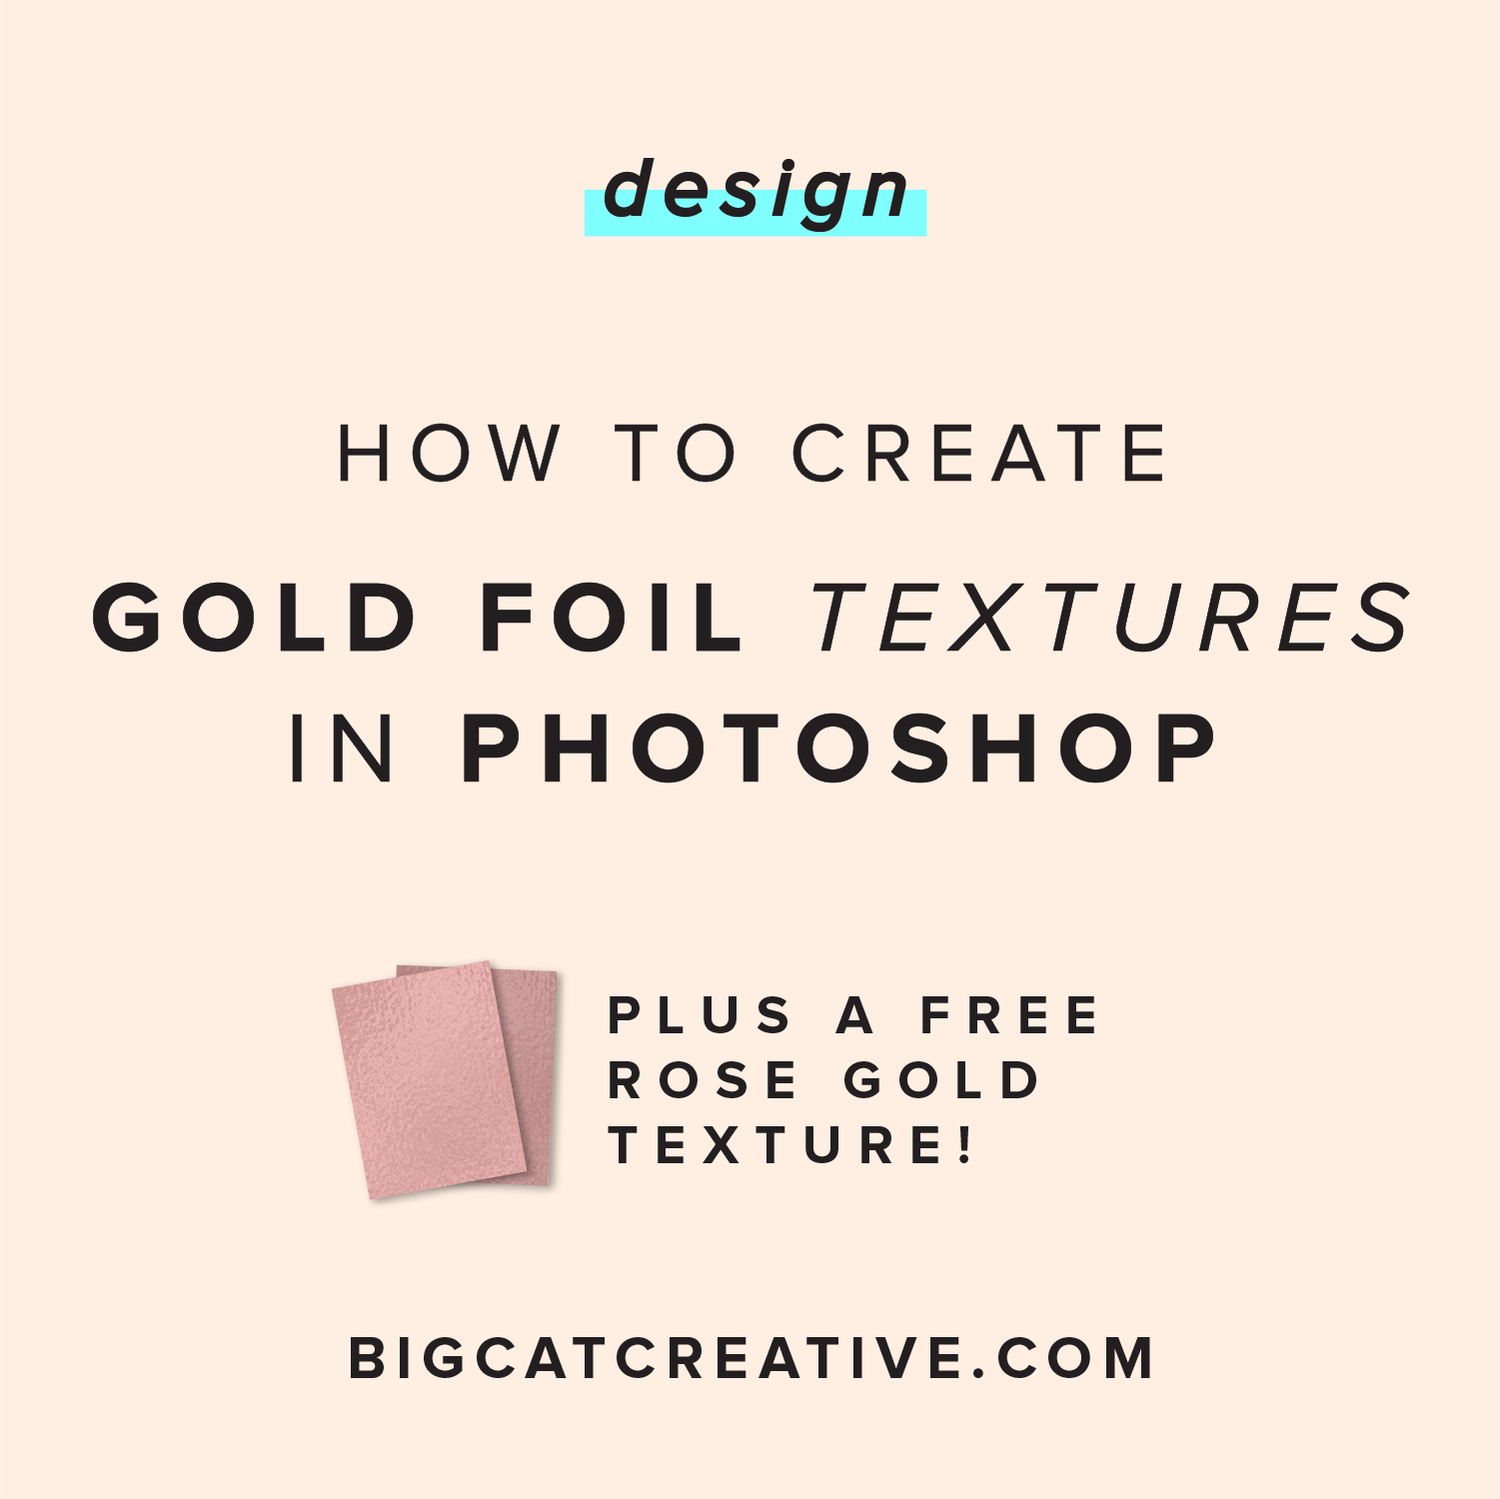 How To Create A Gold Foil Texture In Photoshop Big Cat Creative